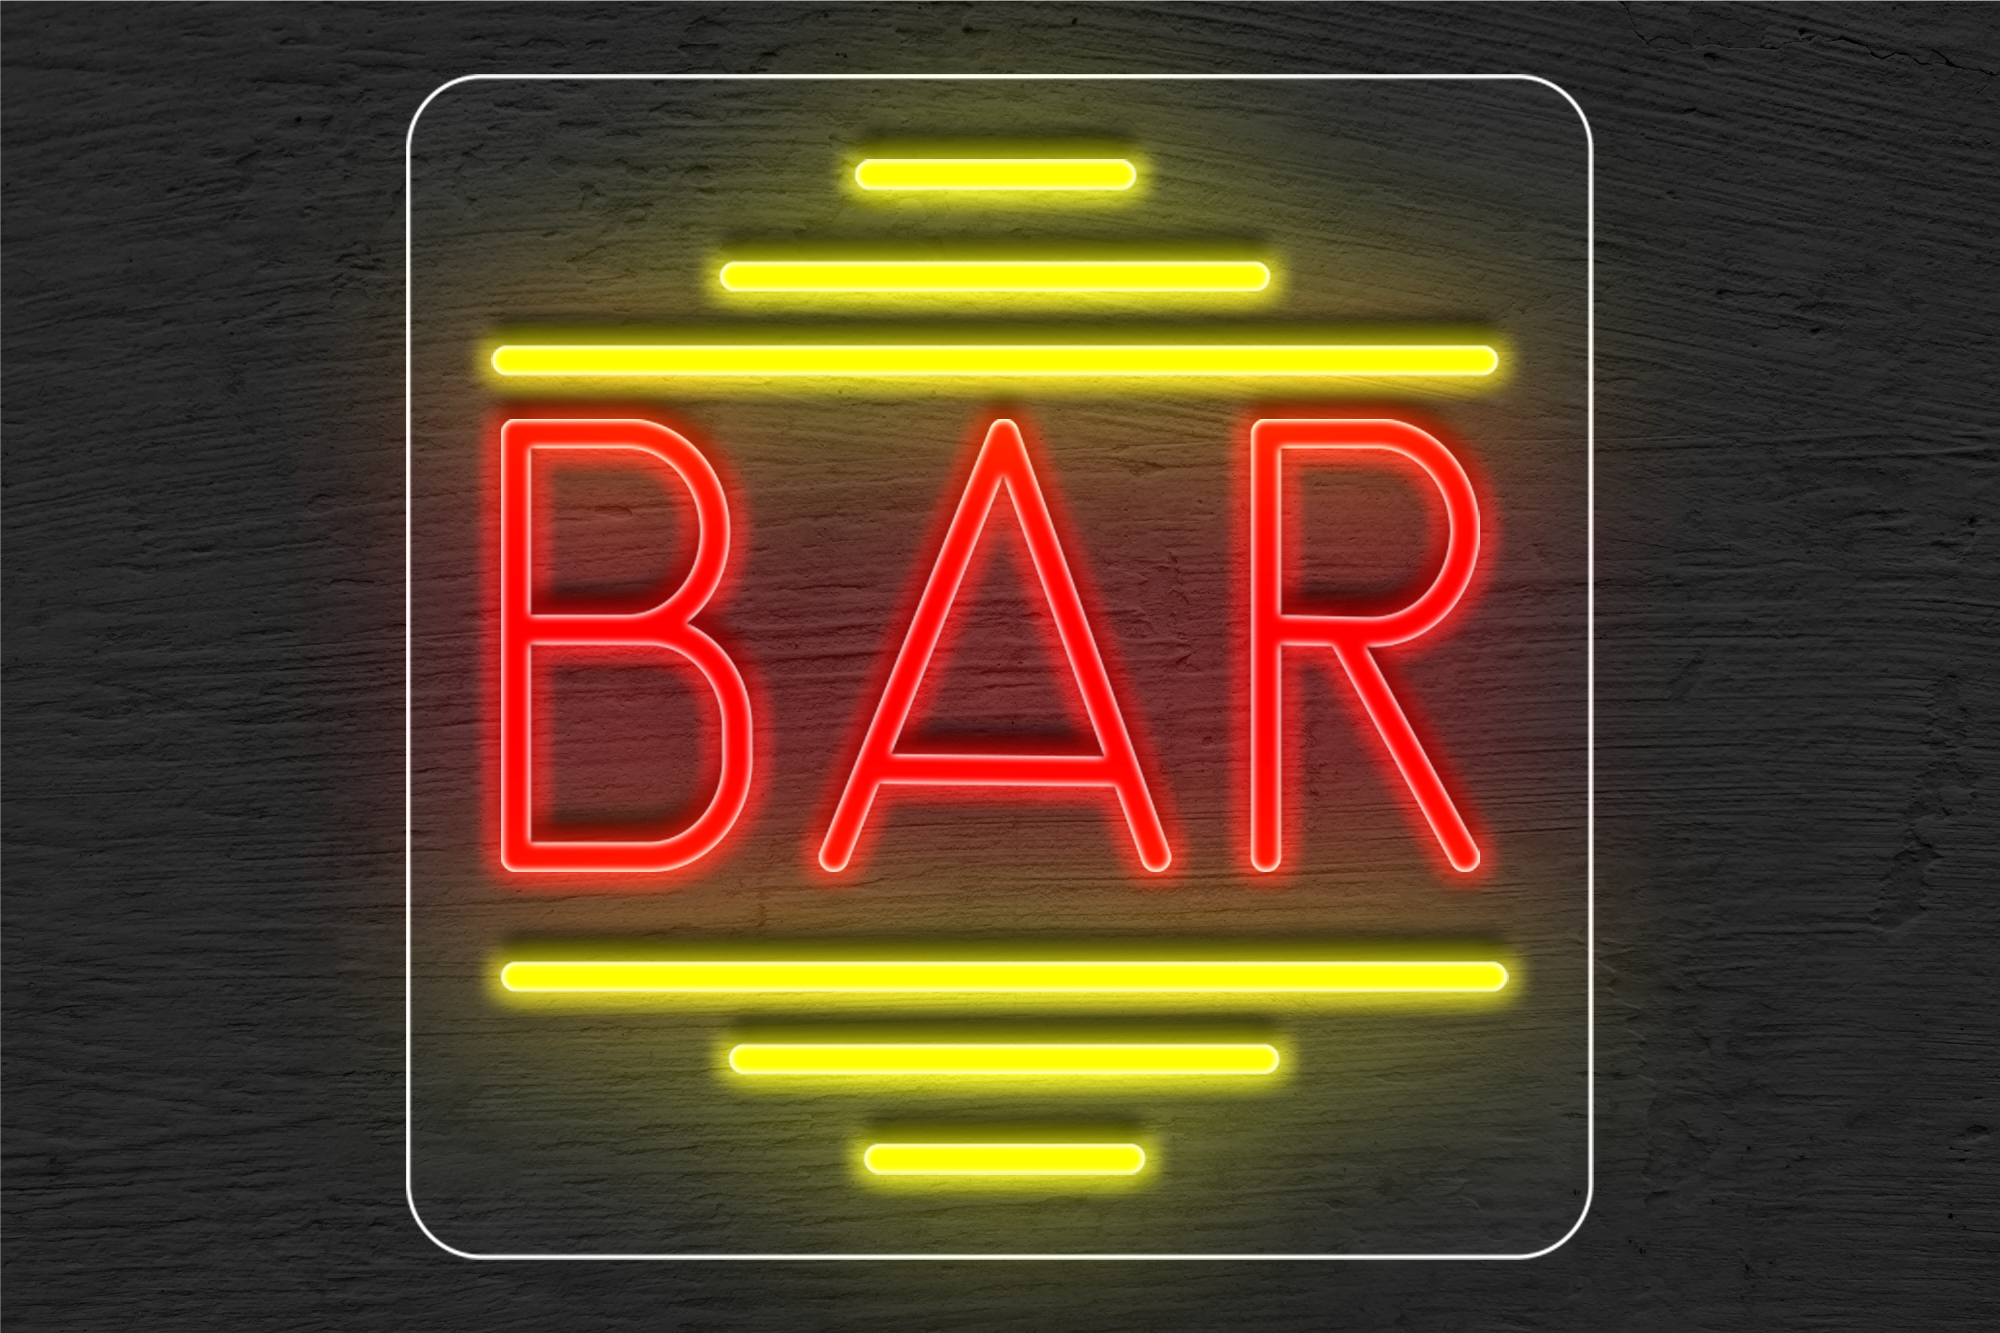 "BAR" with 3 Lines on Top and Bottom LED Neon Sign